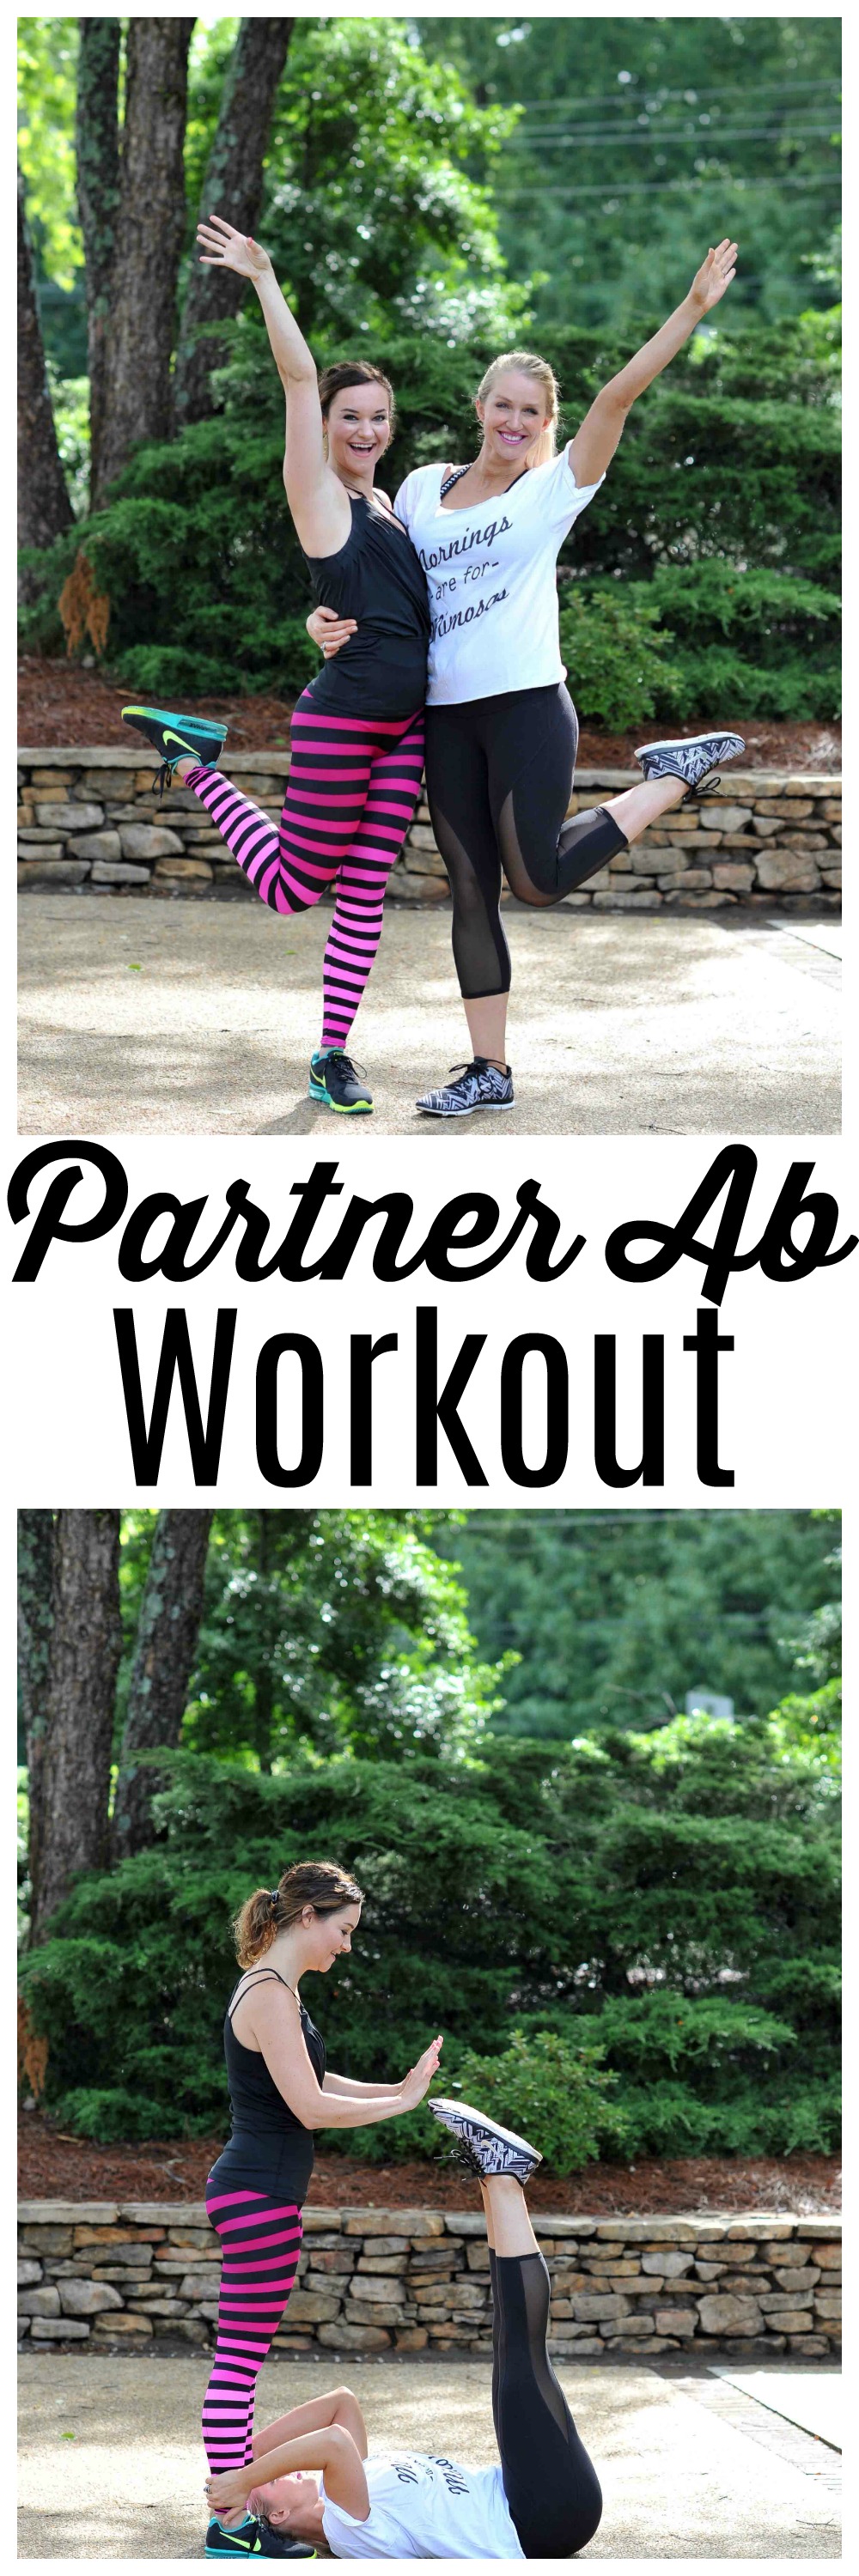 Partner Ab Workouts with Premier Protein by fitness blogger Jessica of Happily Hughes